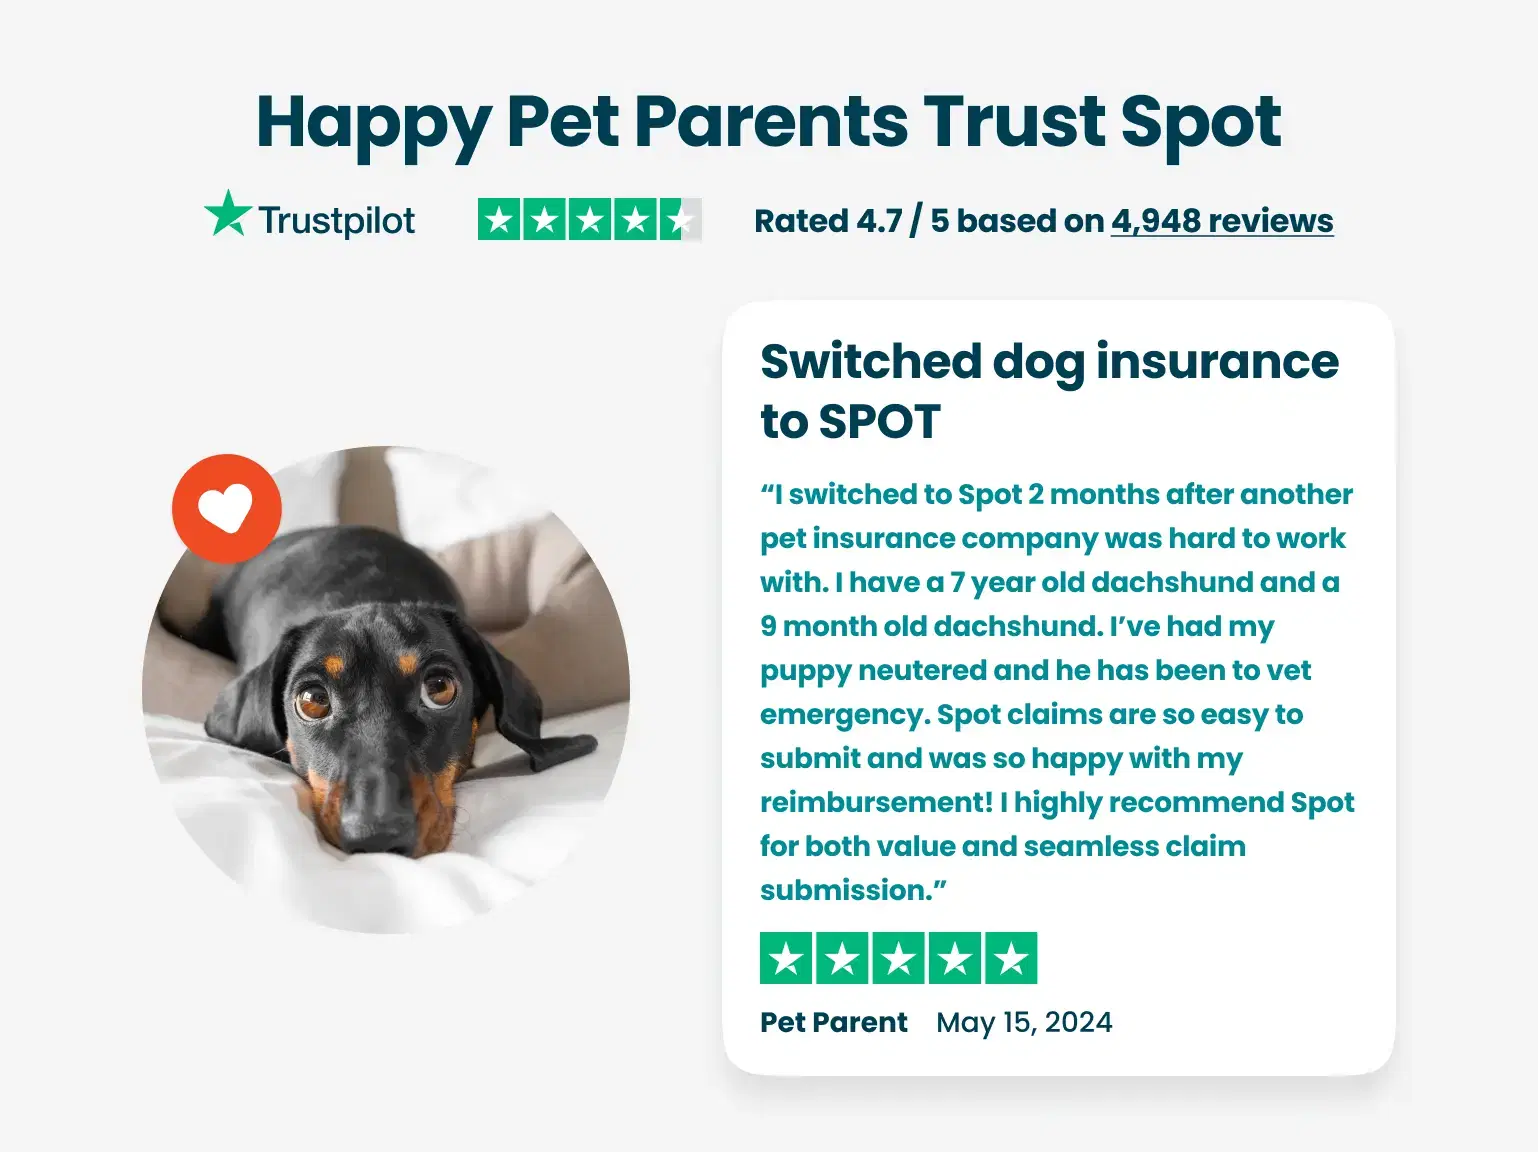 A dachshund lies on a white blanket next to text showing a positive review for SPOT dog insurance.